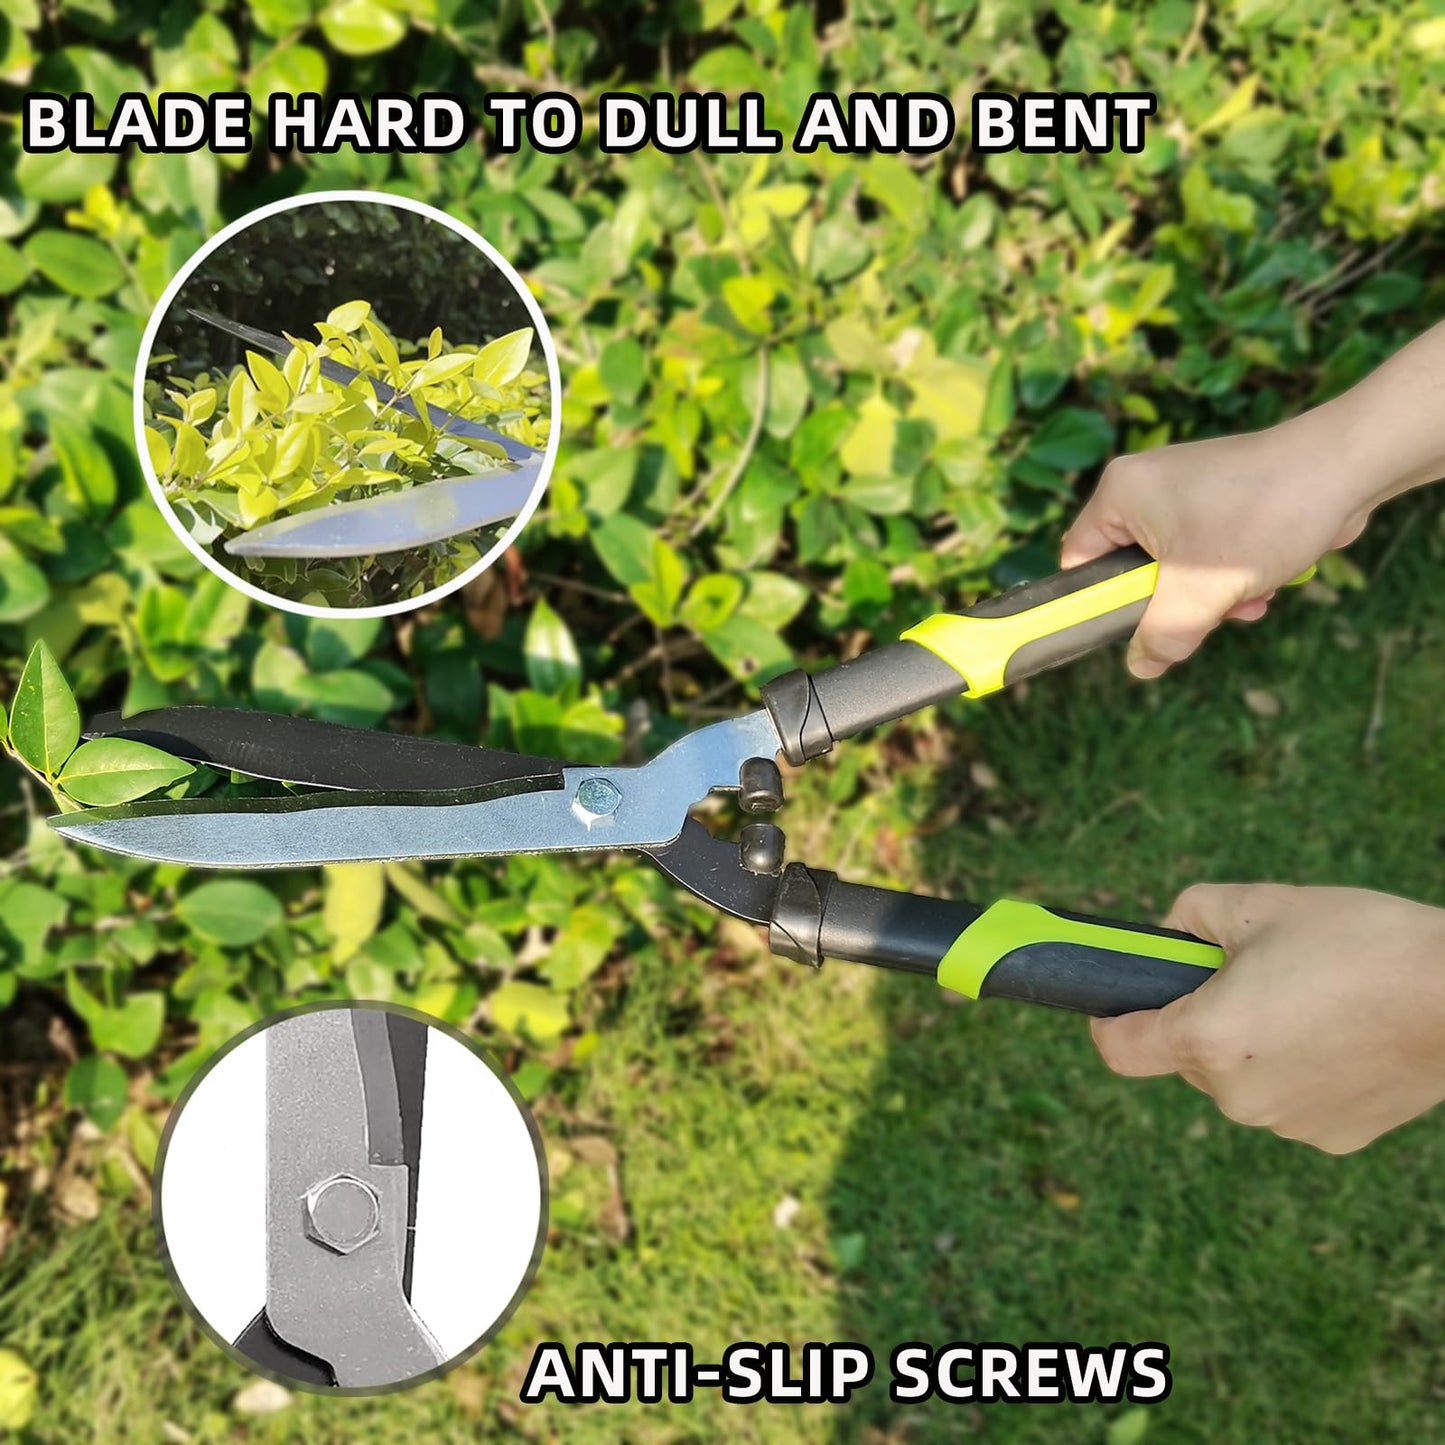 YRTSH Hedge Clippers Shears Hedge Shears for Trimming Borders, Garden Tools Hedge Clippers, Bush Cutters Trimmer with Sharp Wavy Blades, Garden Shears for Hedges (19 Inch)